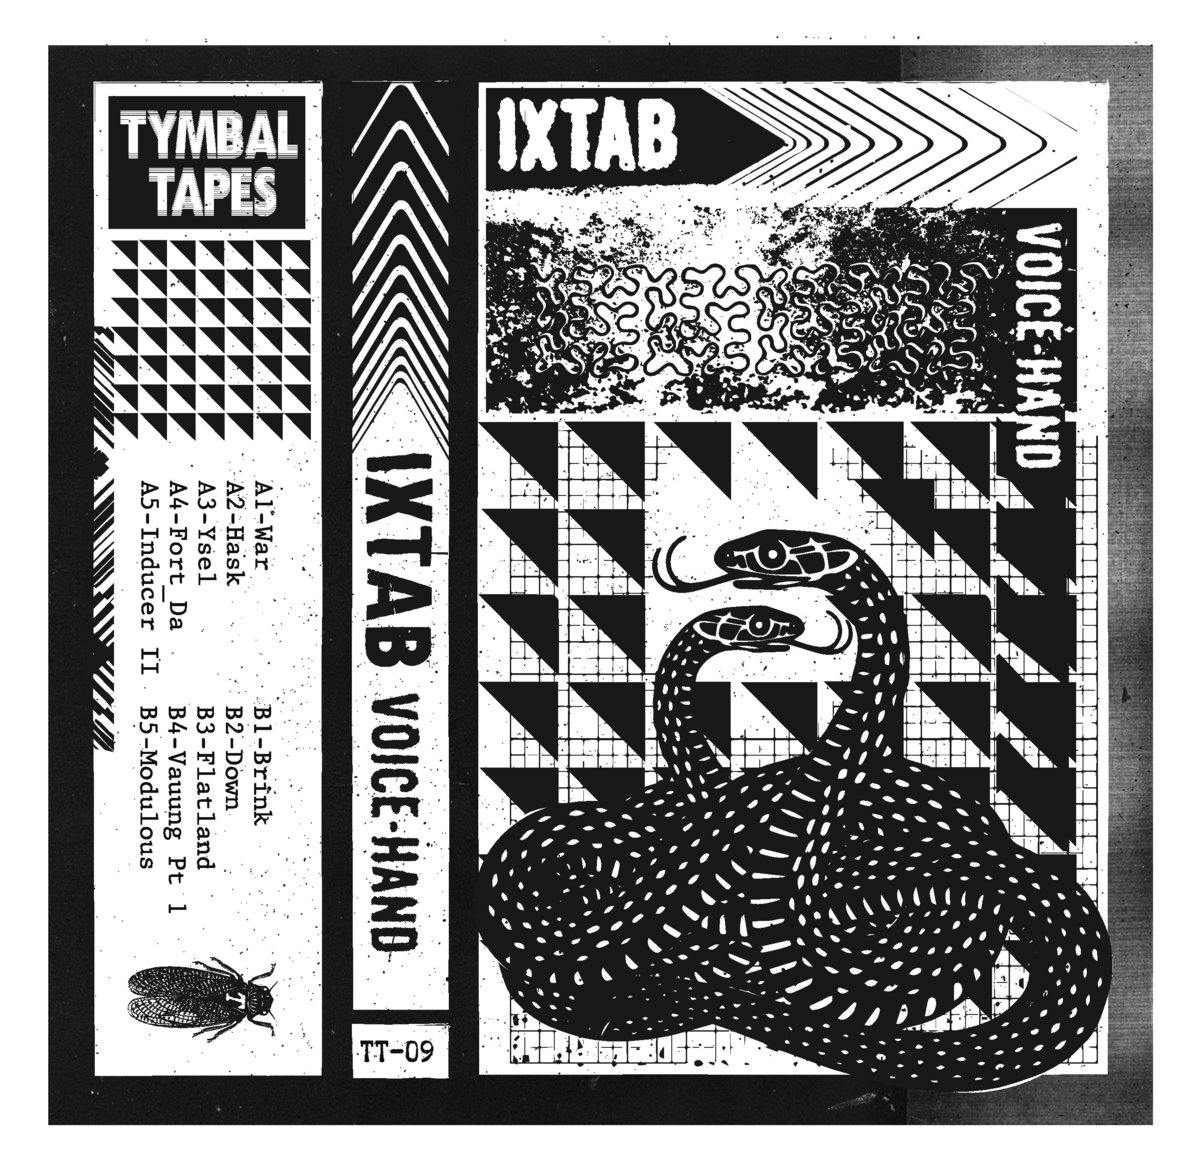 image cover: IXTAB - Voice-Hand / Tymbal Tapes / TT-09